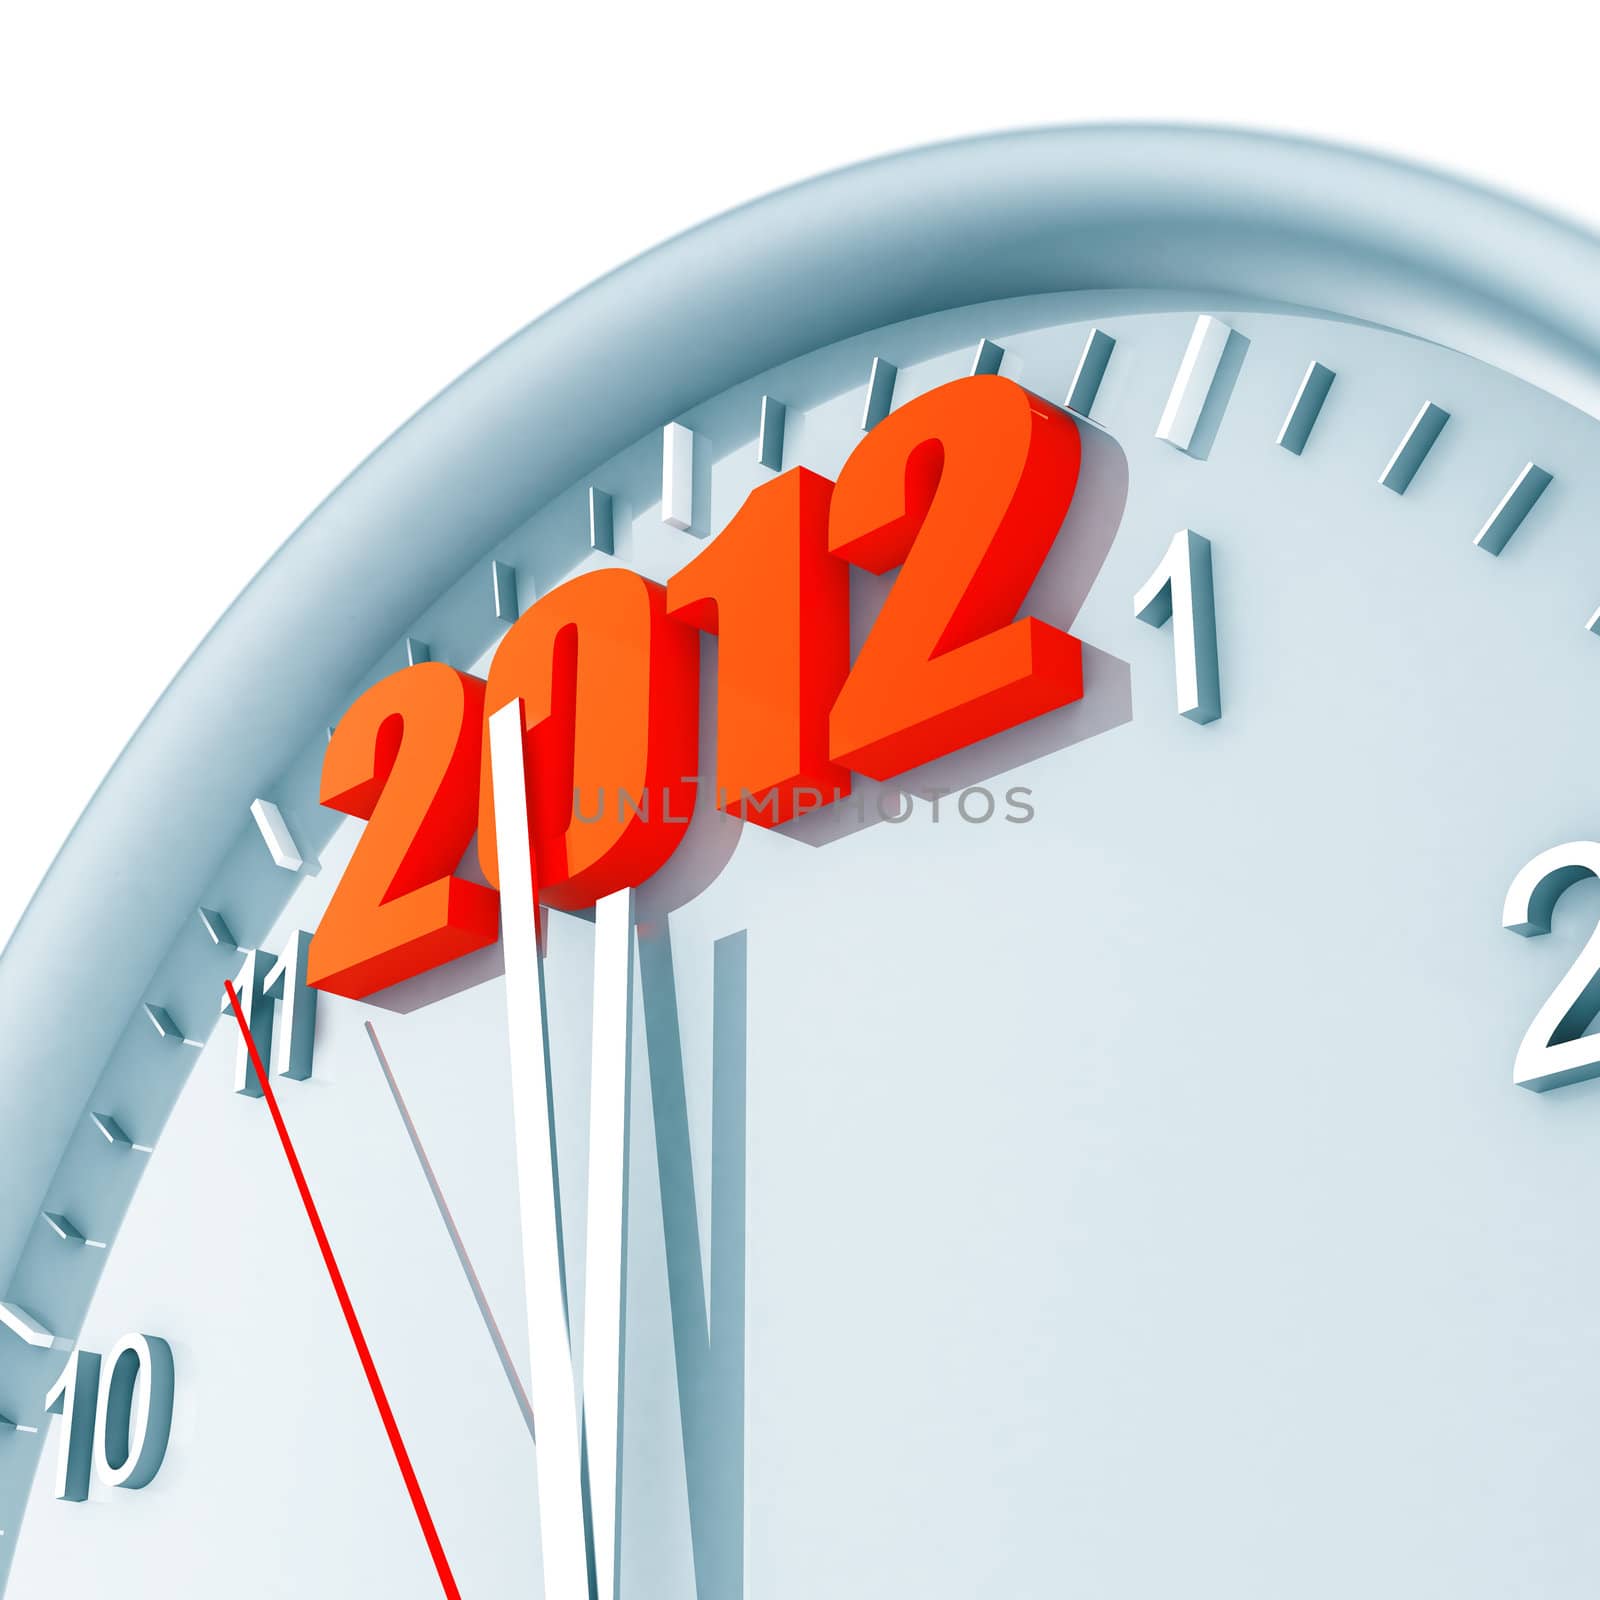 Round clock with arrows and red number 2012 in the top part by Serp